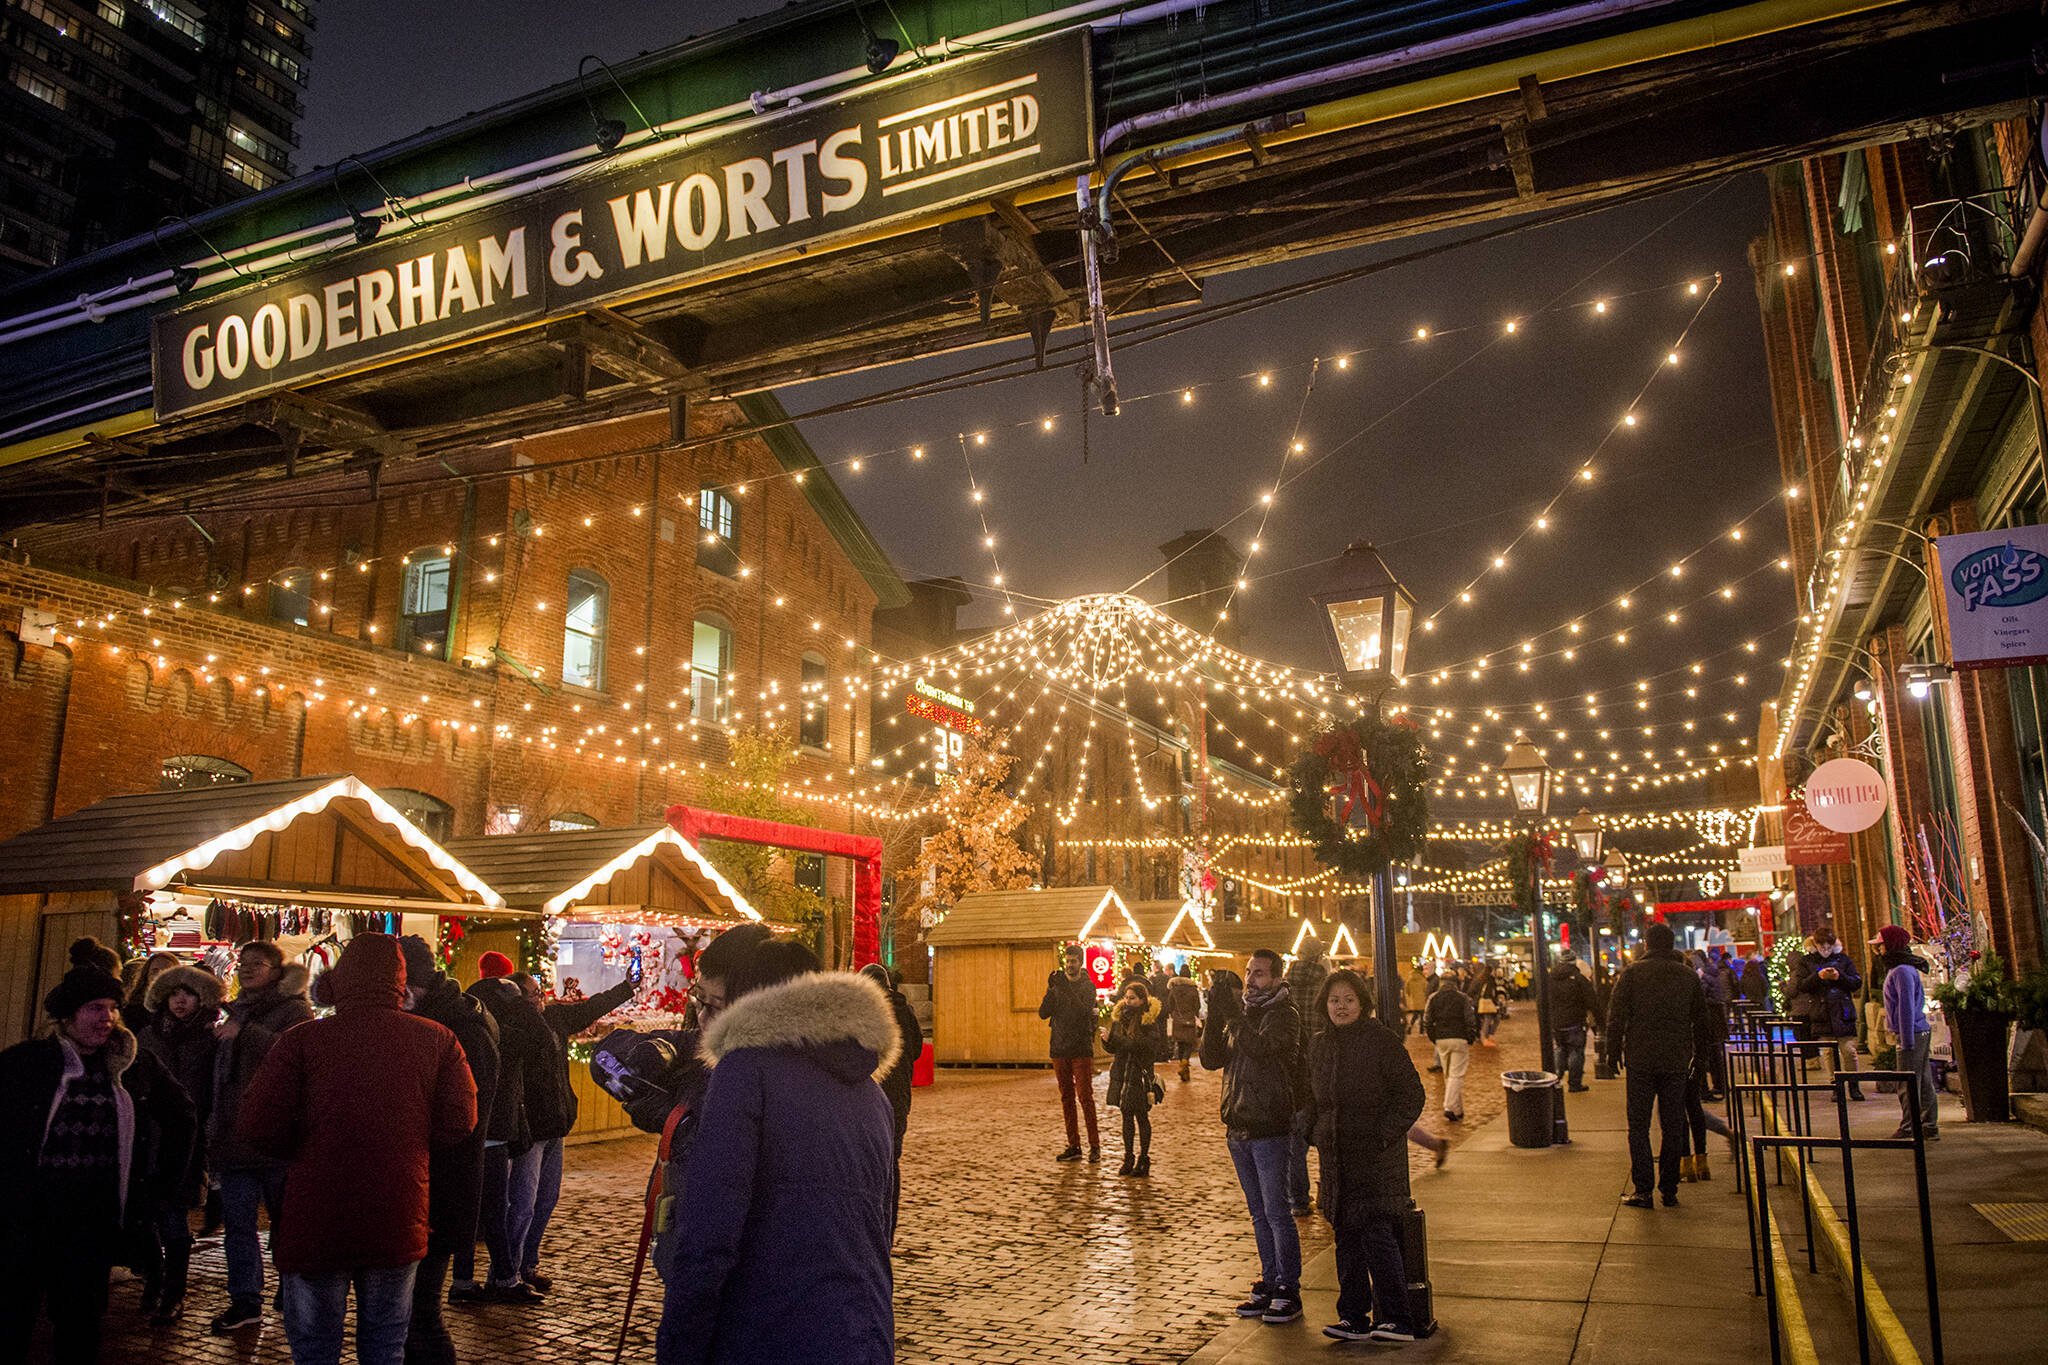 The Toronto Christmas Market is coming back this winter